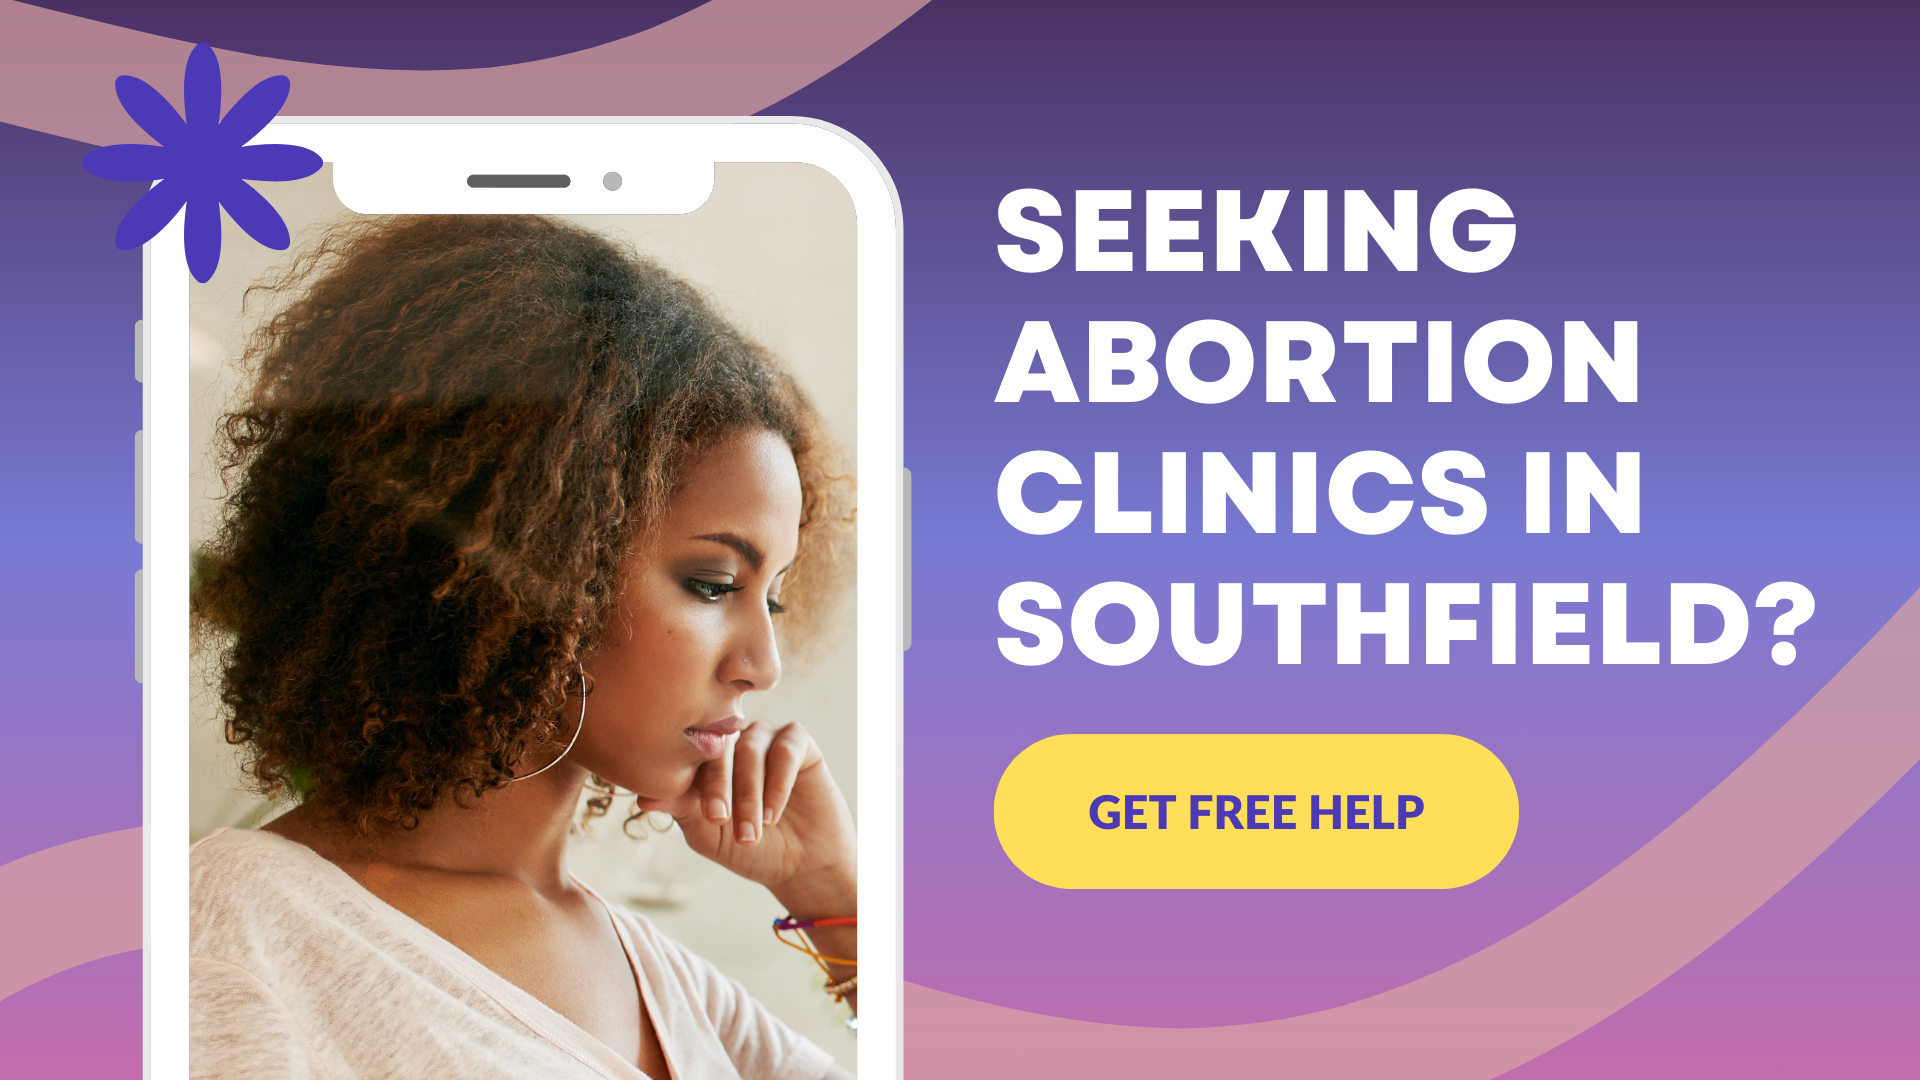 Discover the Best Free Alternatives to Abortion Clinics in Southfield for Comprehensive Care and Support at the Problem Pregnancy Center. 